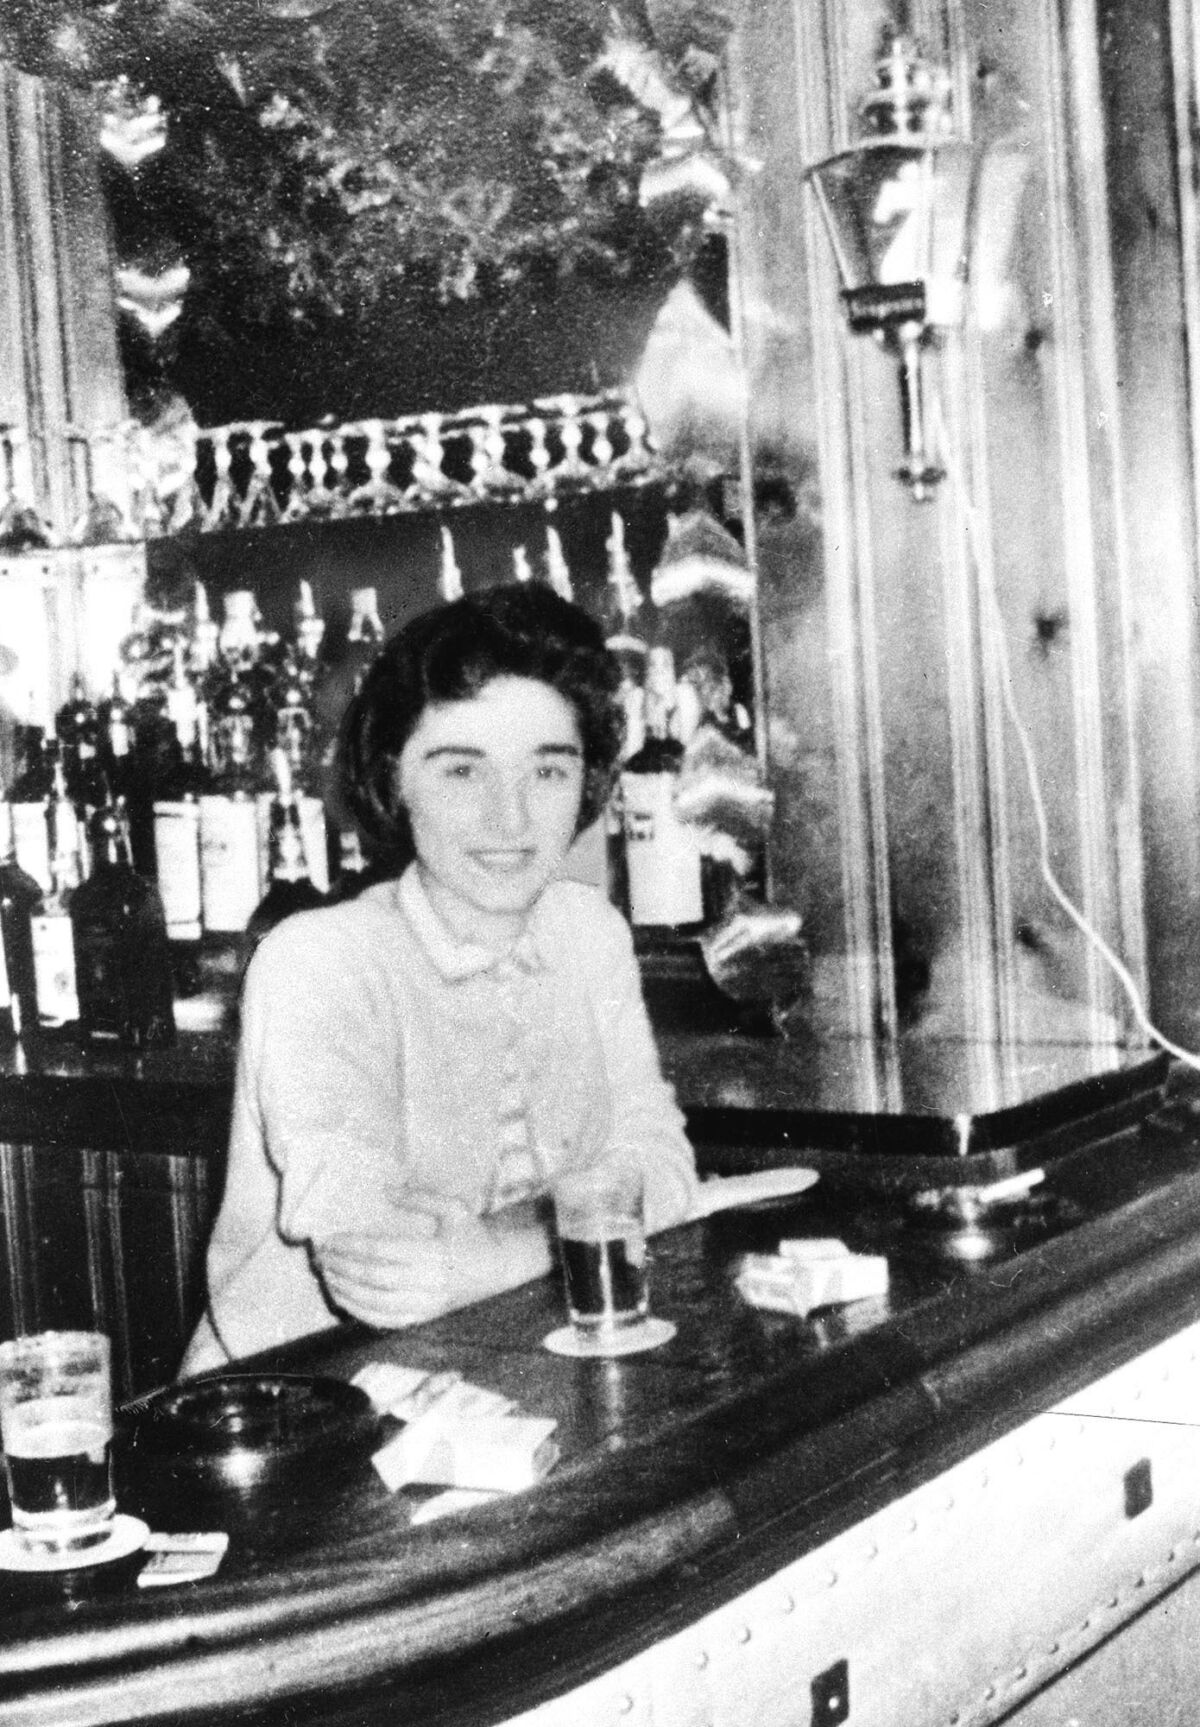 Kitty Genovese whose screams could not save her the night she was stalked and killed in 1964 in the Queens neighborhood of New York. A man convicted of the stabbing death of Genovese died in a New York prison at 81.